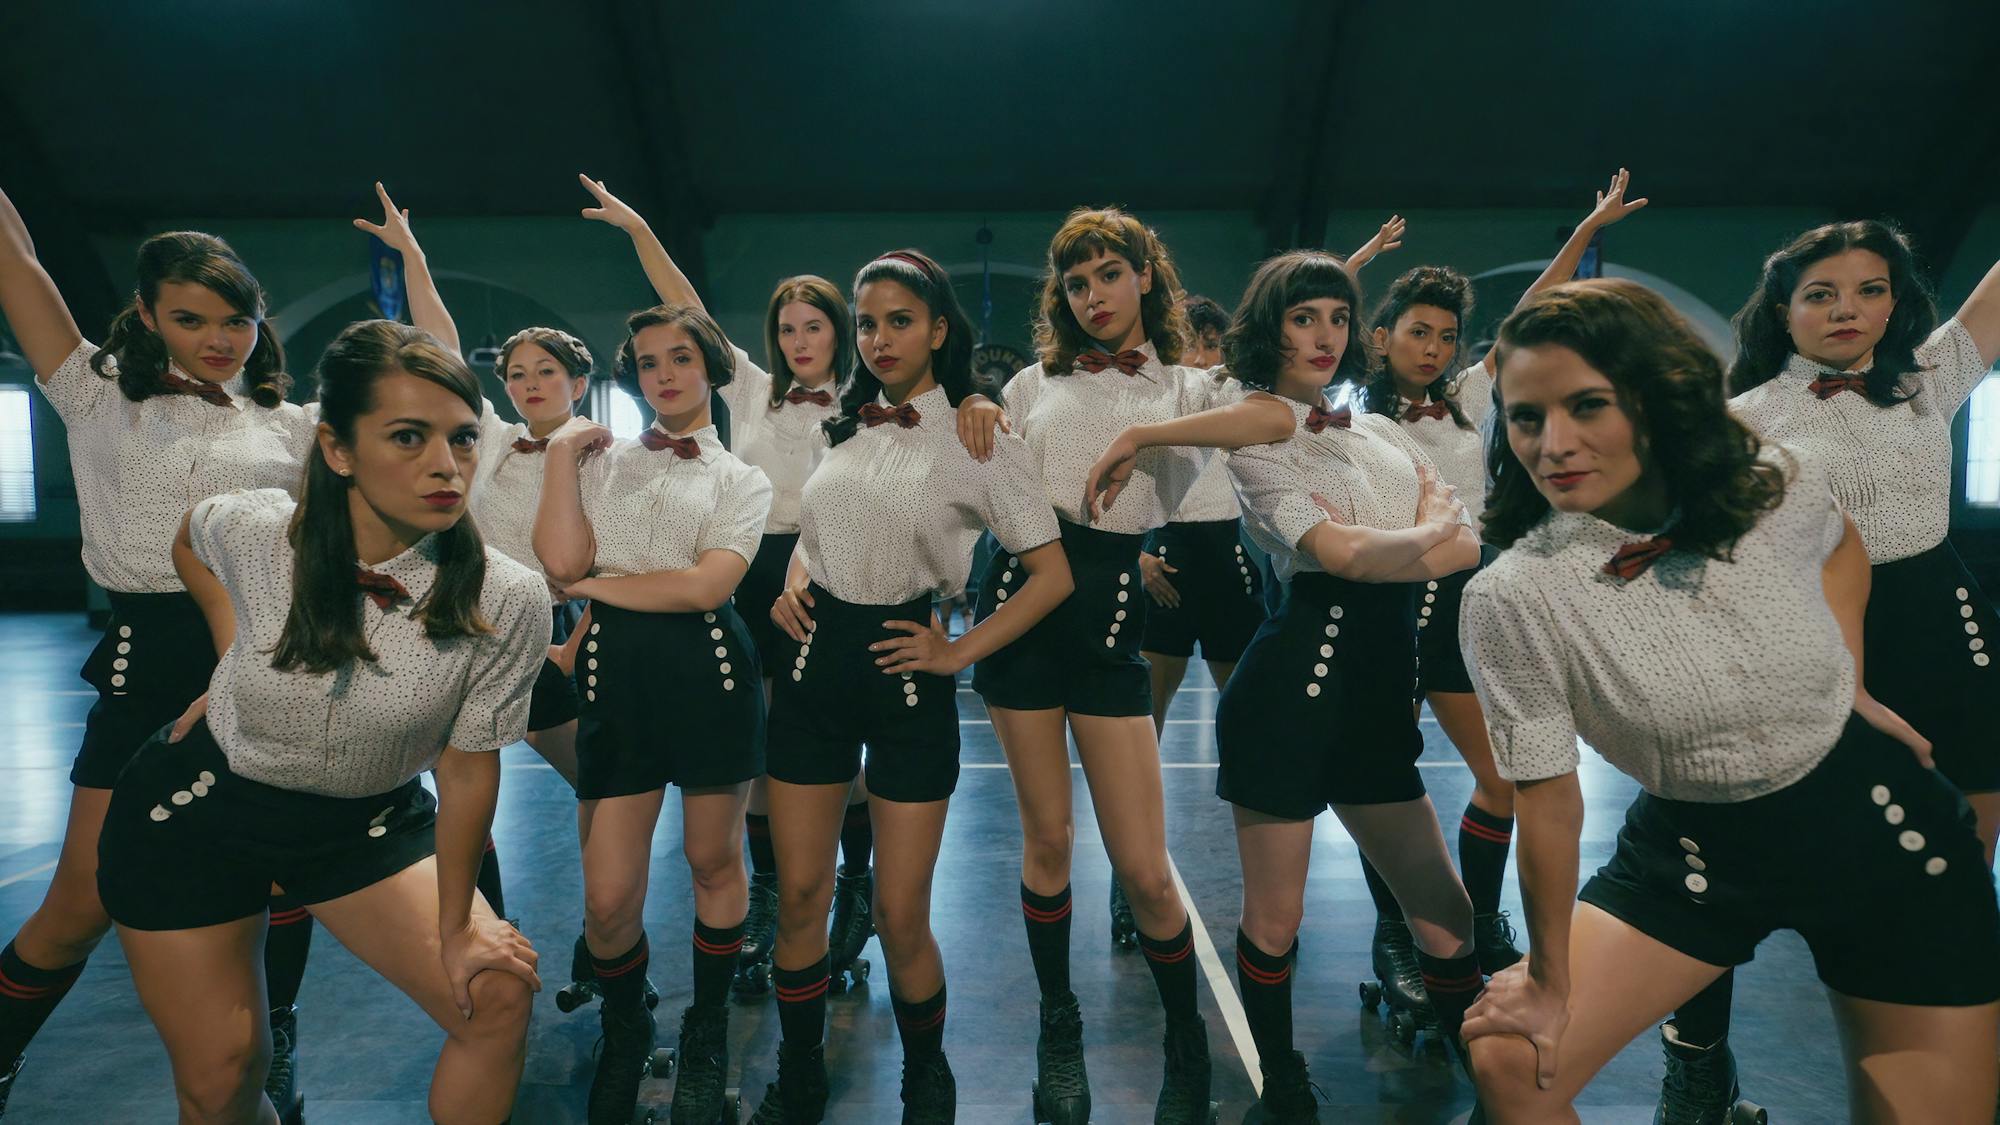 Veronica Lodge (Suhana Khan), Betty Cooper (Khushi Kapoor), and Ethel Muggs (Dot) stand around in white blouses and black shorts striking a pose.